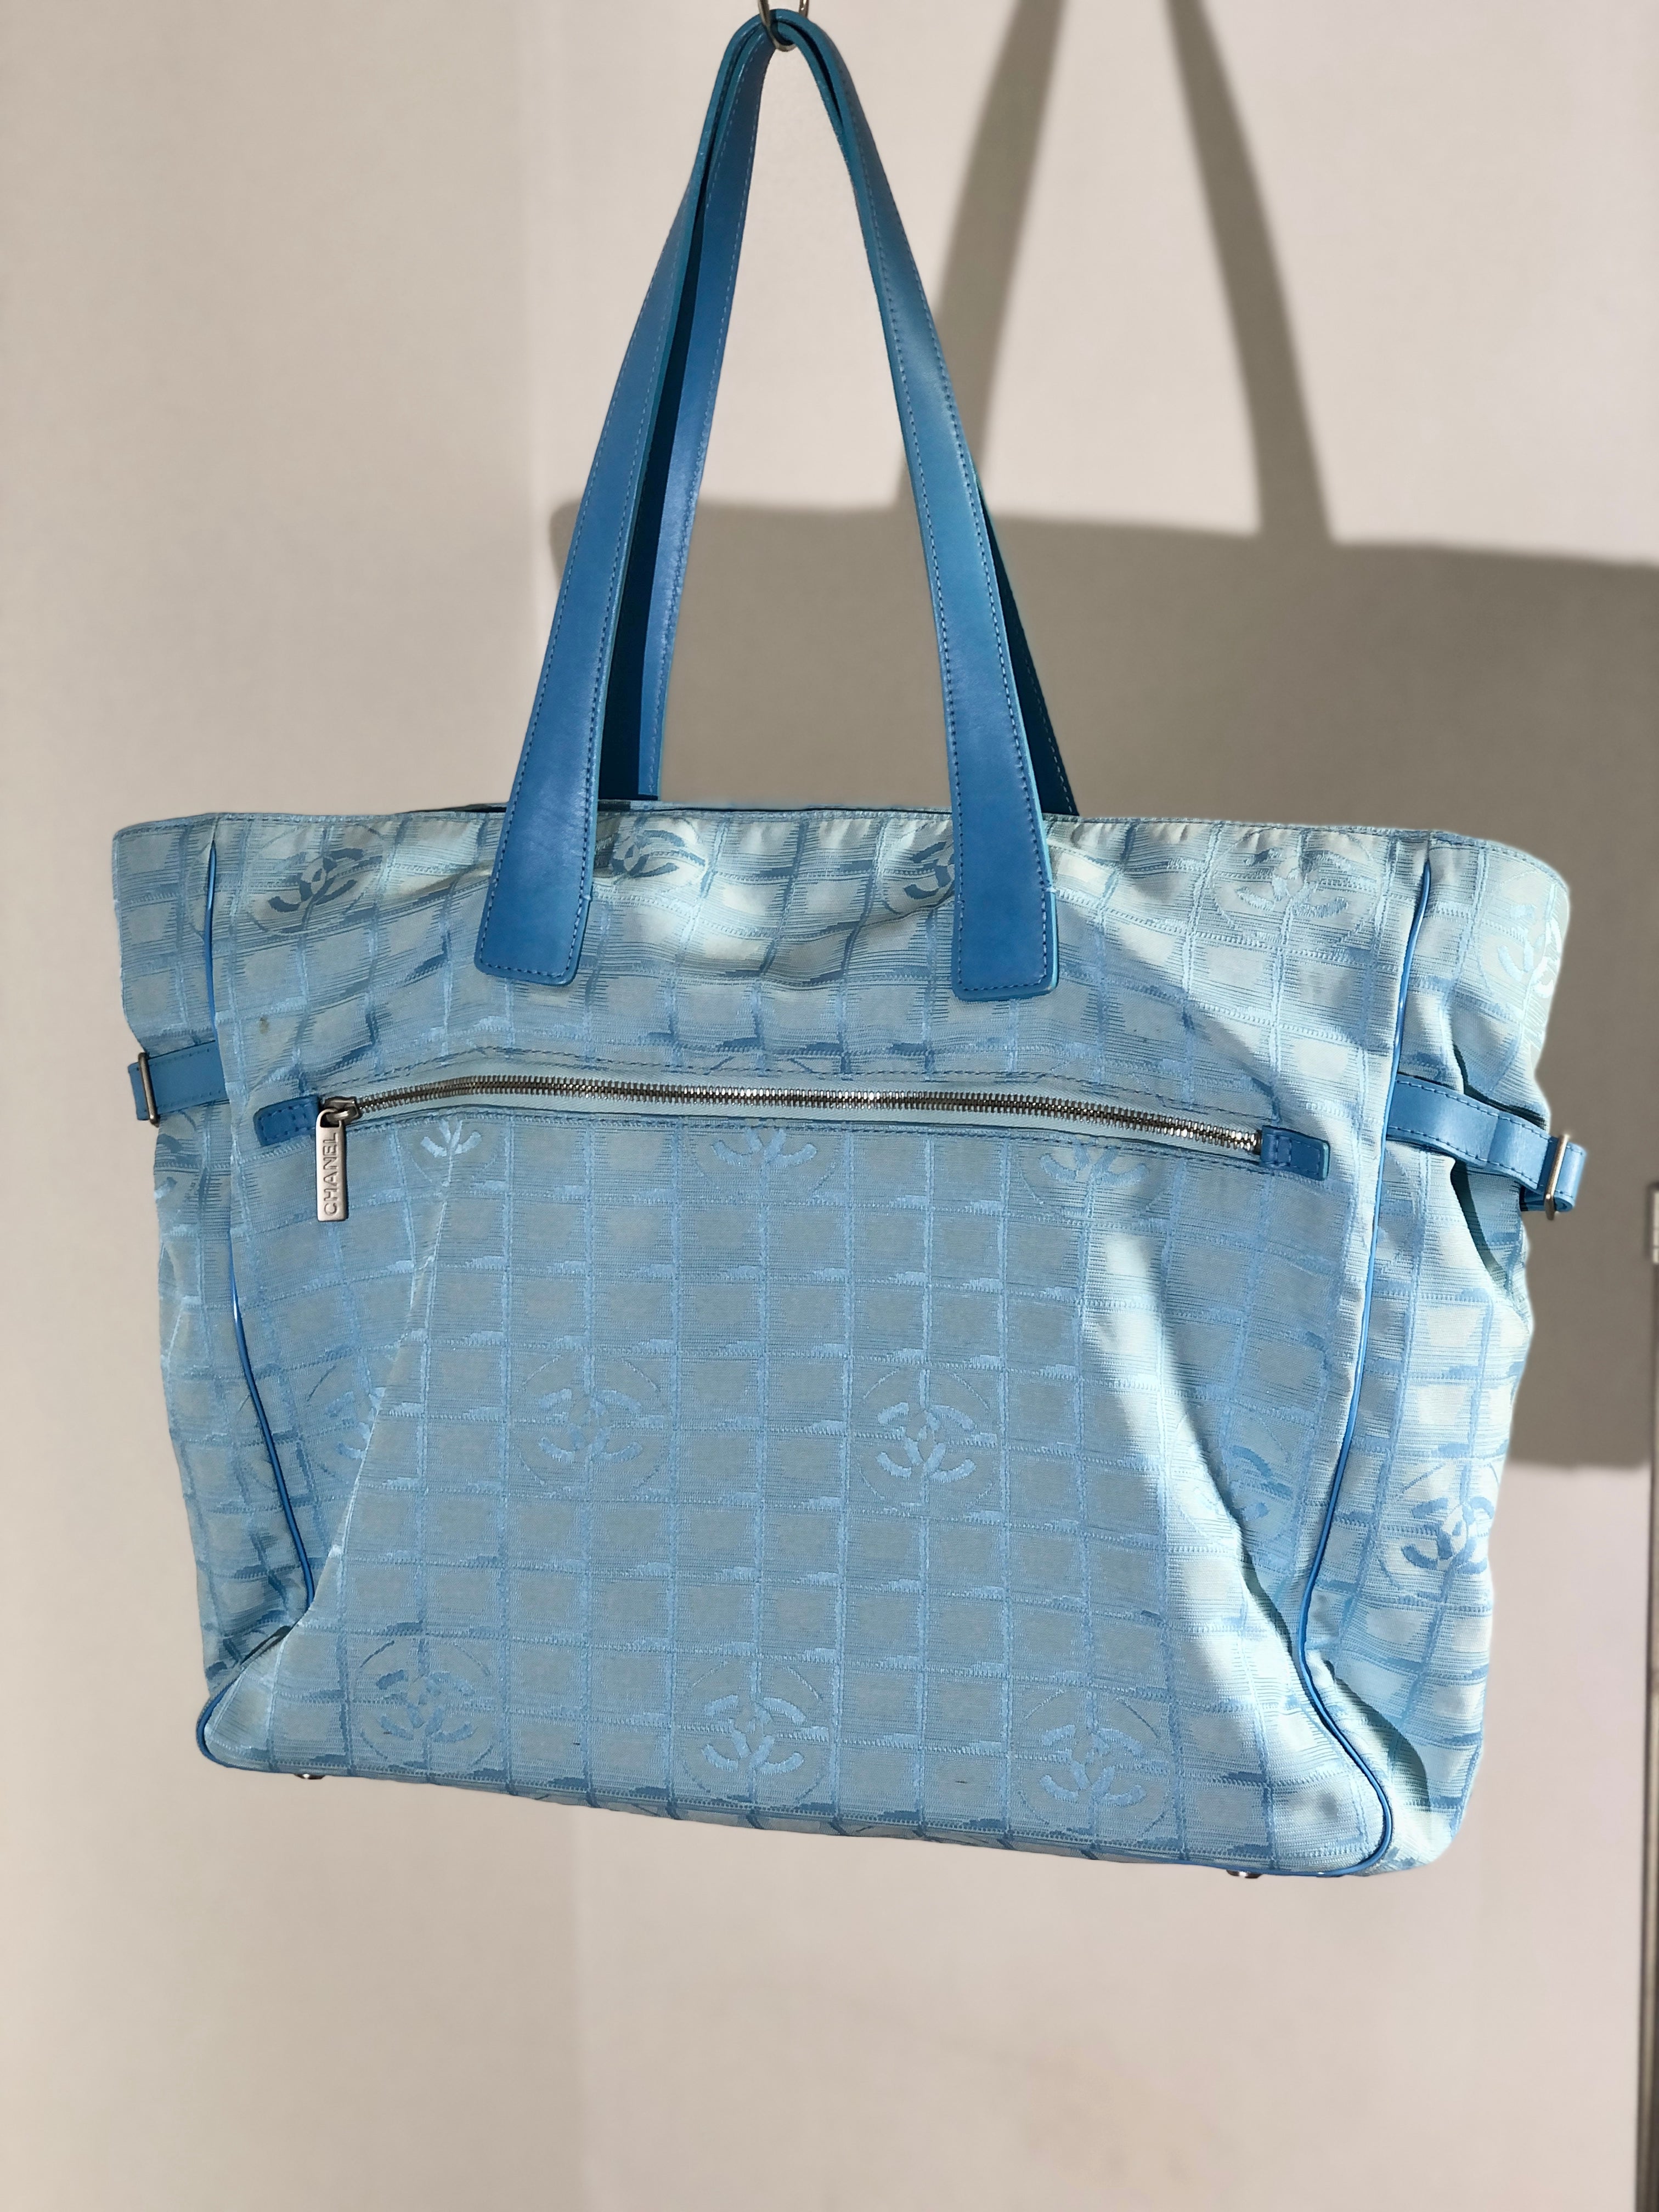 CHANEL, Bags, Auth Blue Chanel Nylon Tote Bag